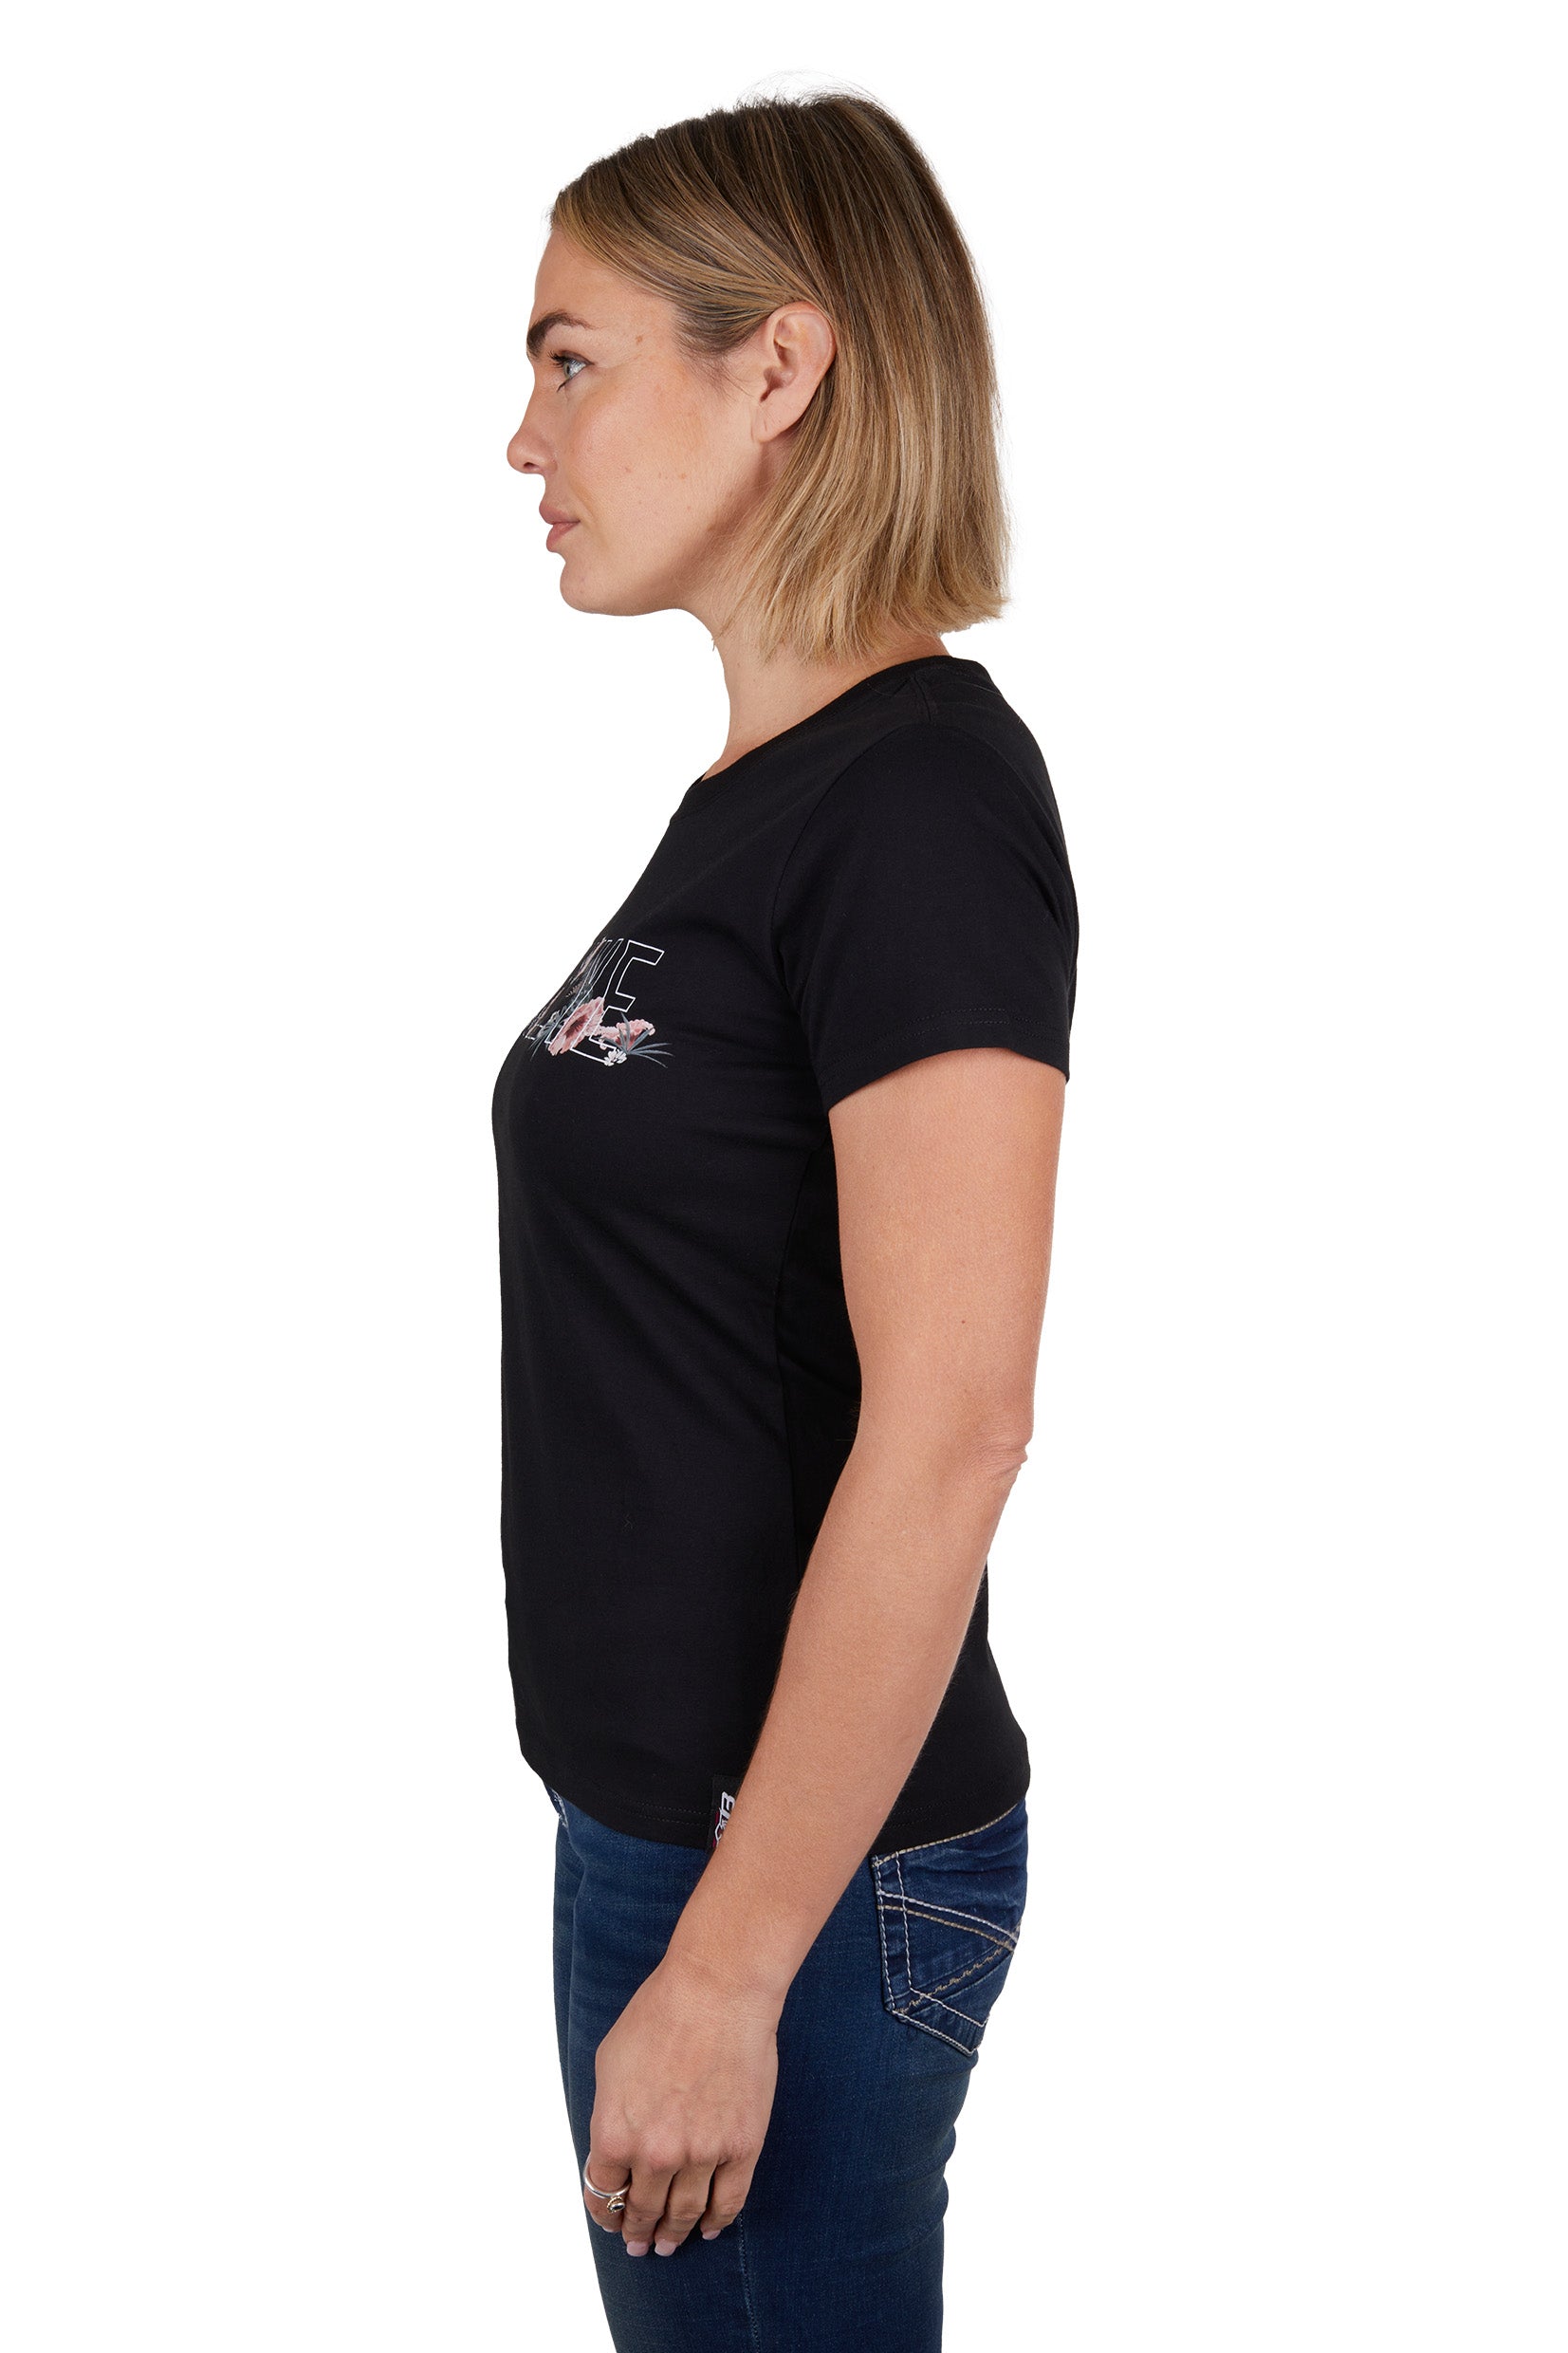 Bullzye Women's Tropics Tee - The Trading Stables